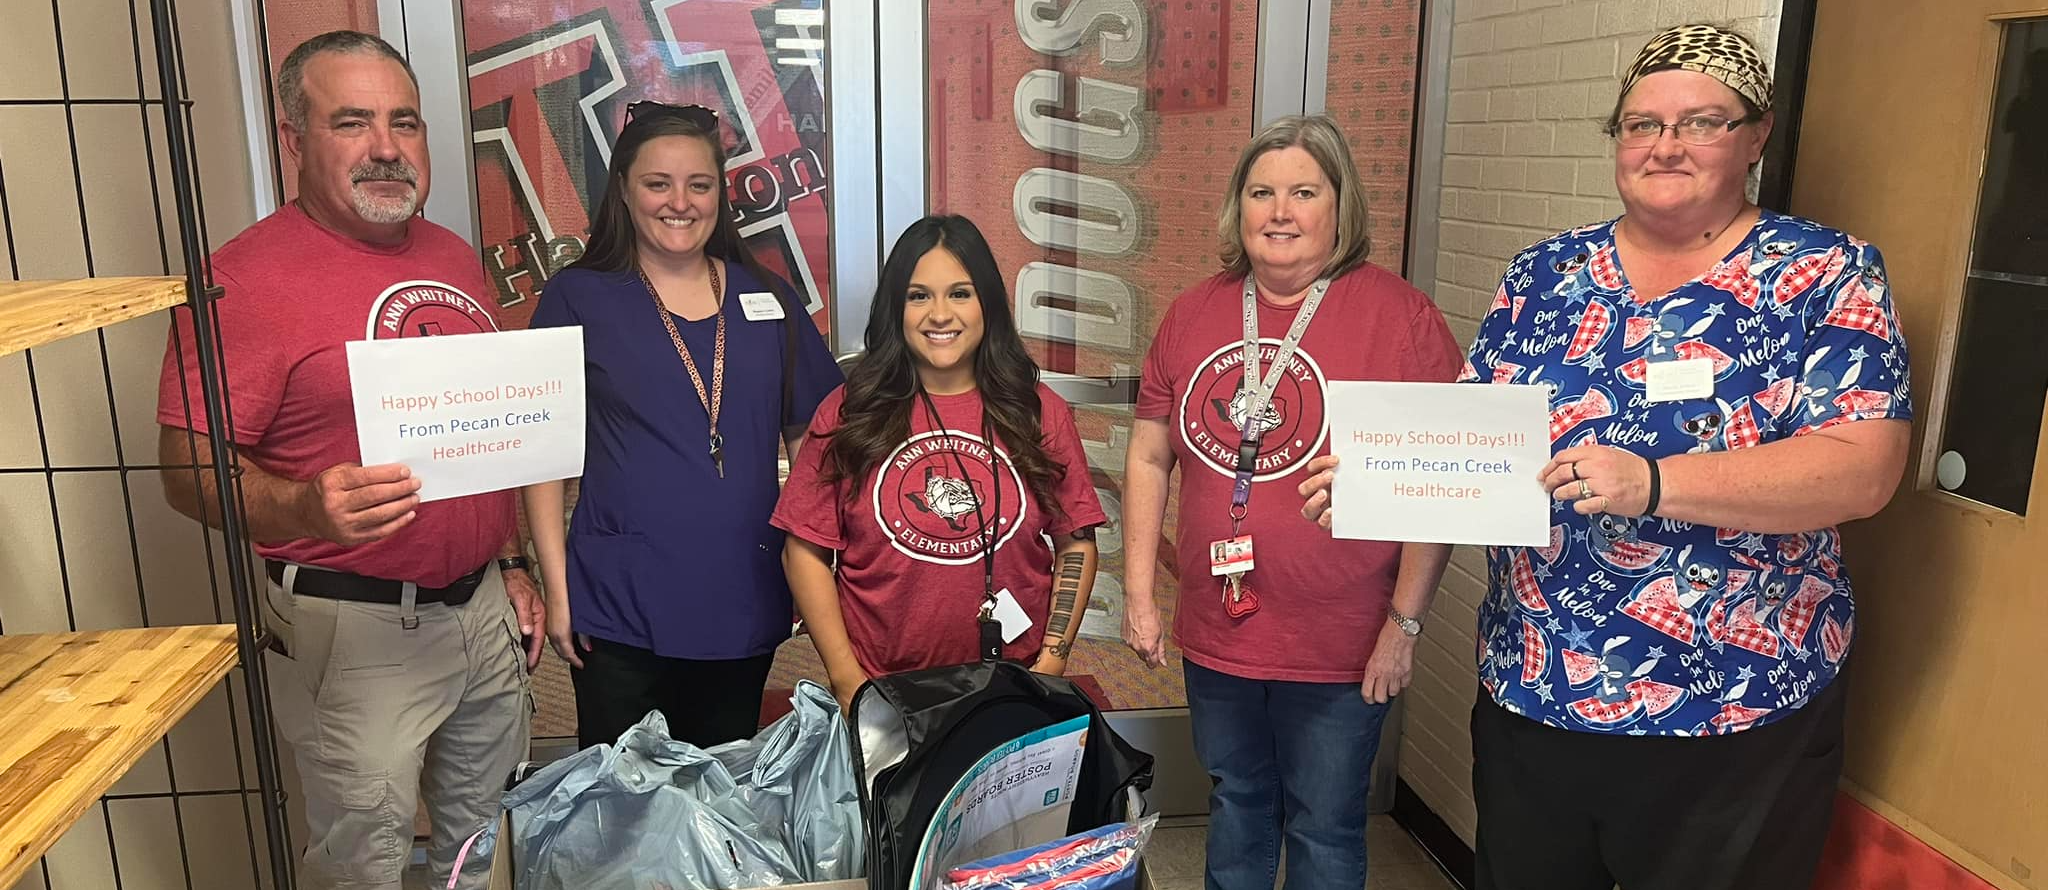 Thank you to our friends at Pecan Creek Healthcare for donating school supplies to our students. We appreciate your kindness and support.